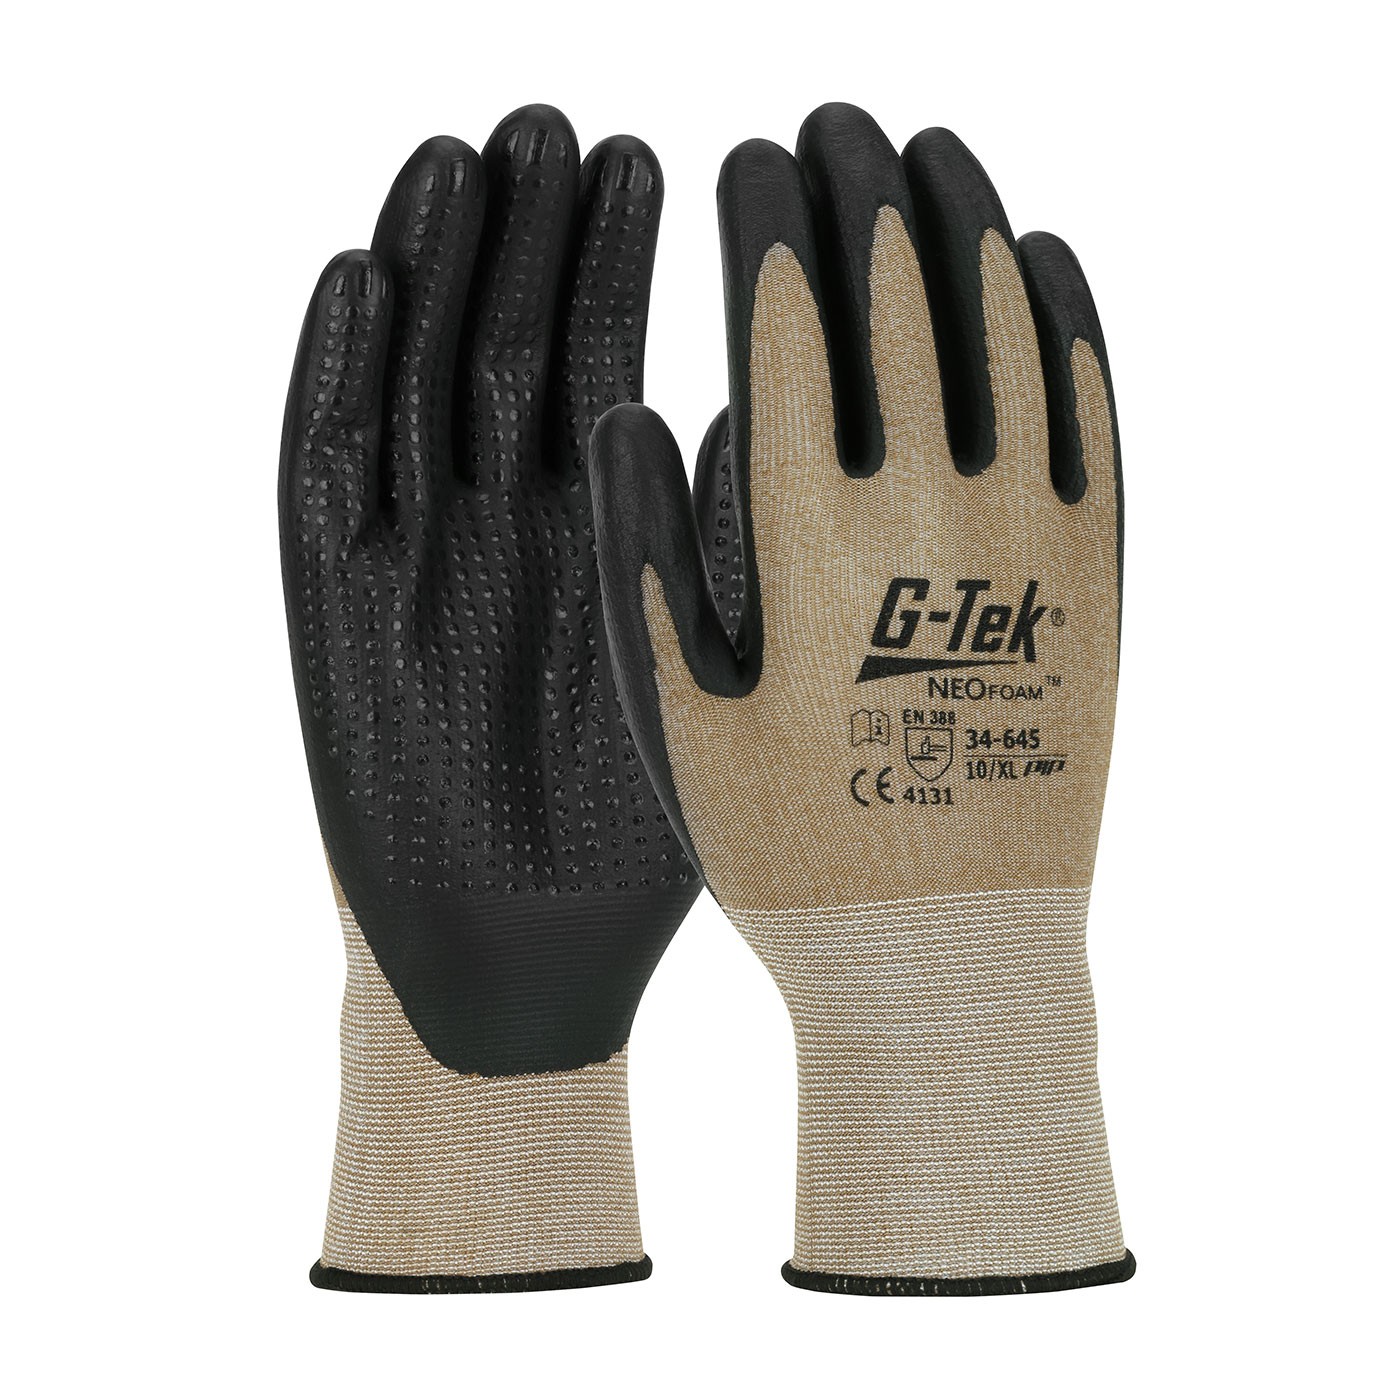 G-Tek® NeoFoam® Seamless Nylon Glove with NeoFoam® Coated Palm & Fingers and Micro Dot Palm - Touchscreen Compatible (#34-645)